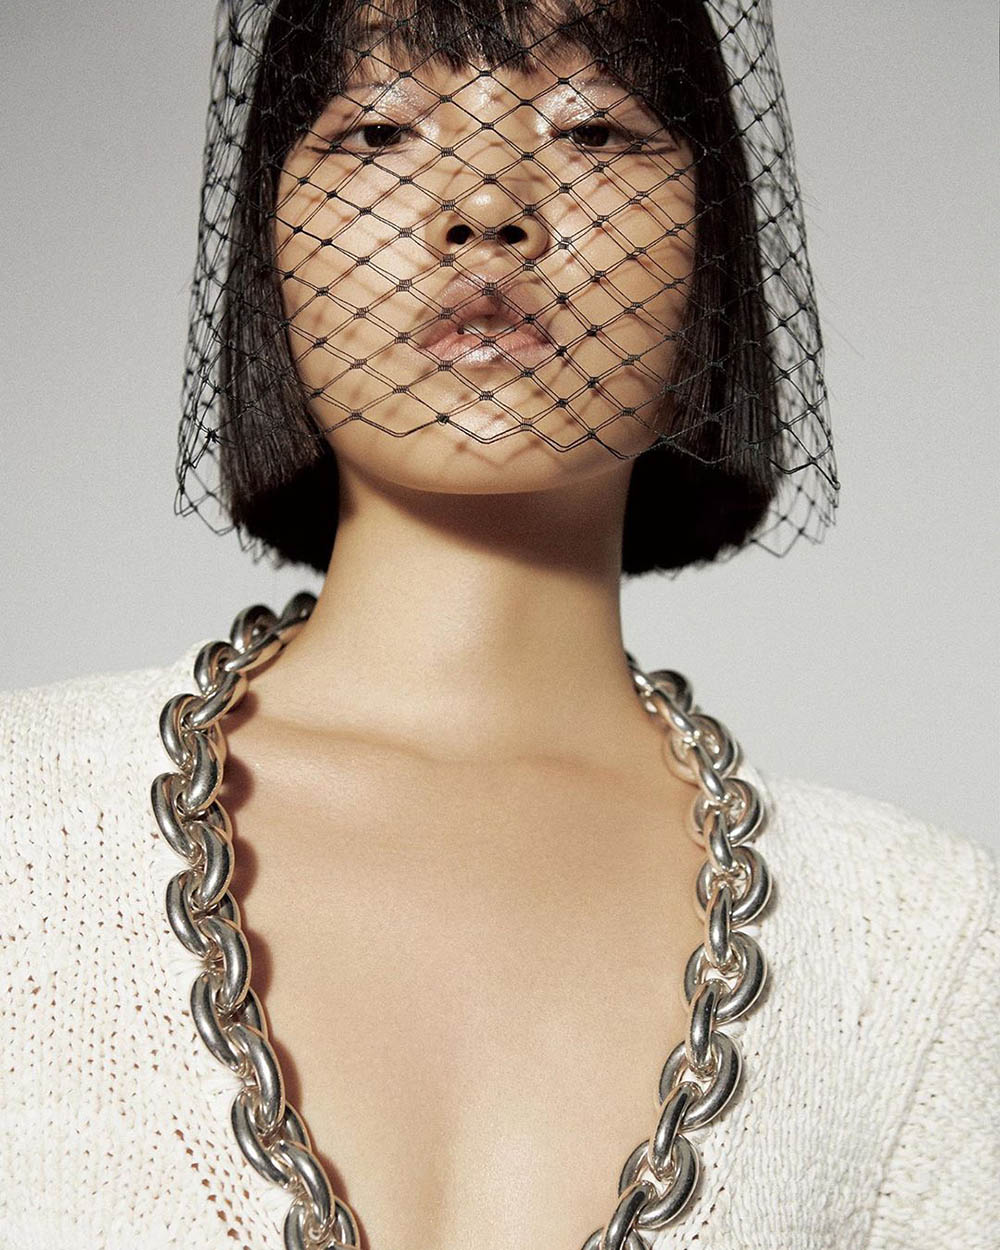 Pan Haowen by Win Tam for Vogue China June 2020